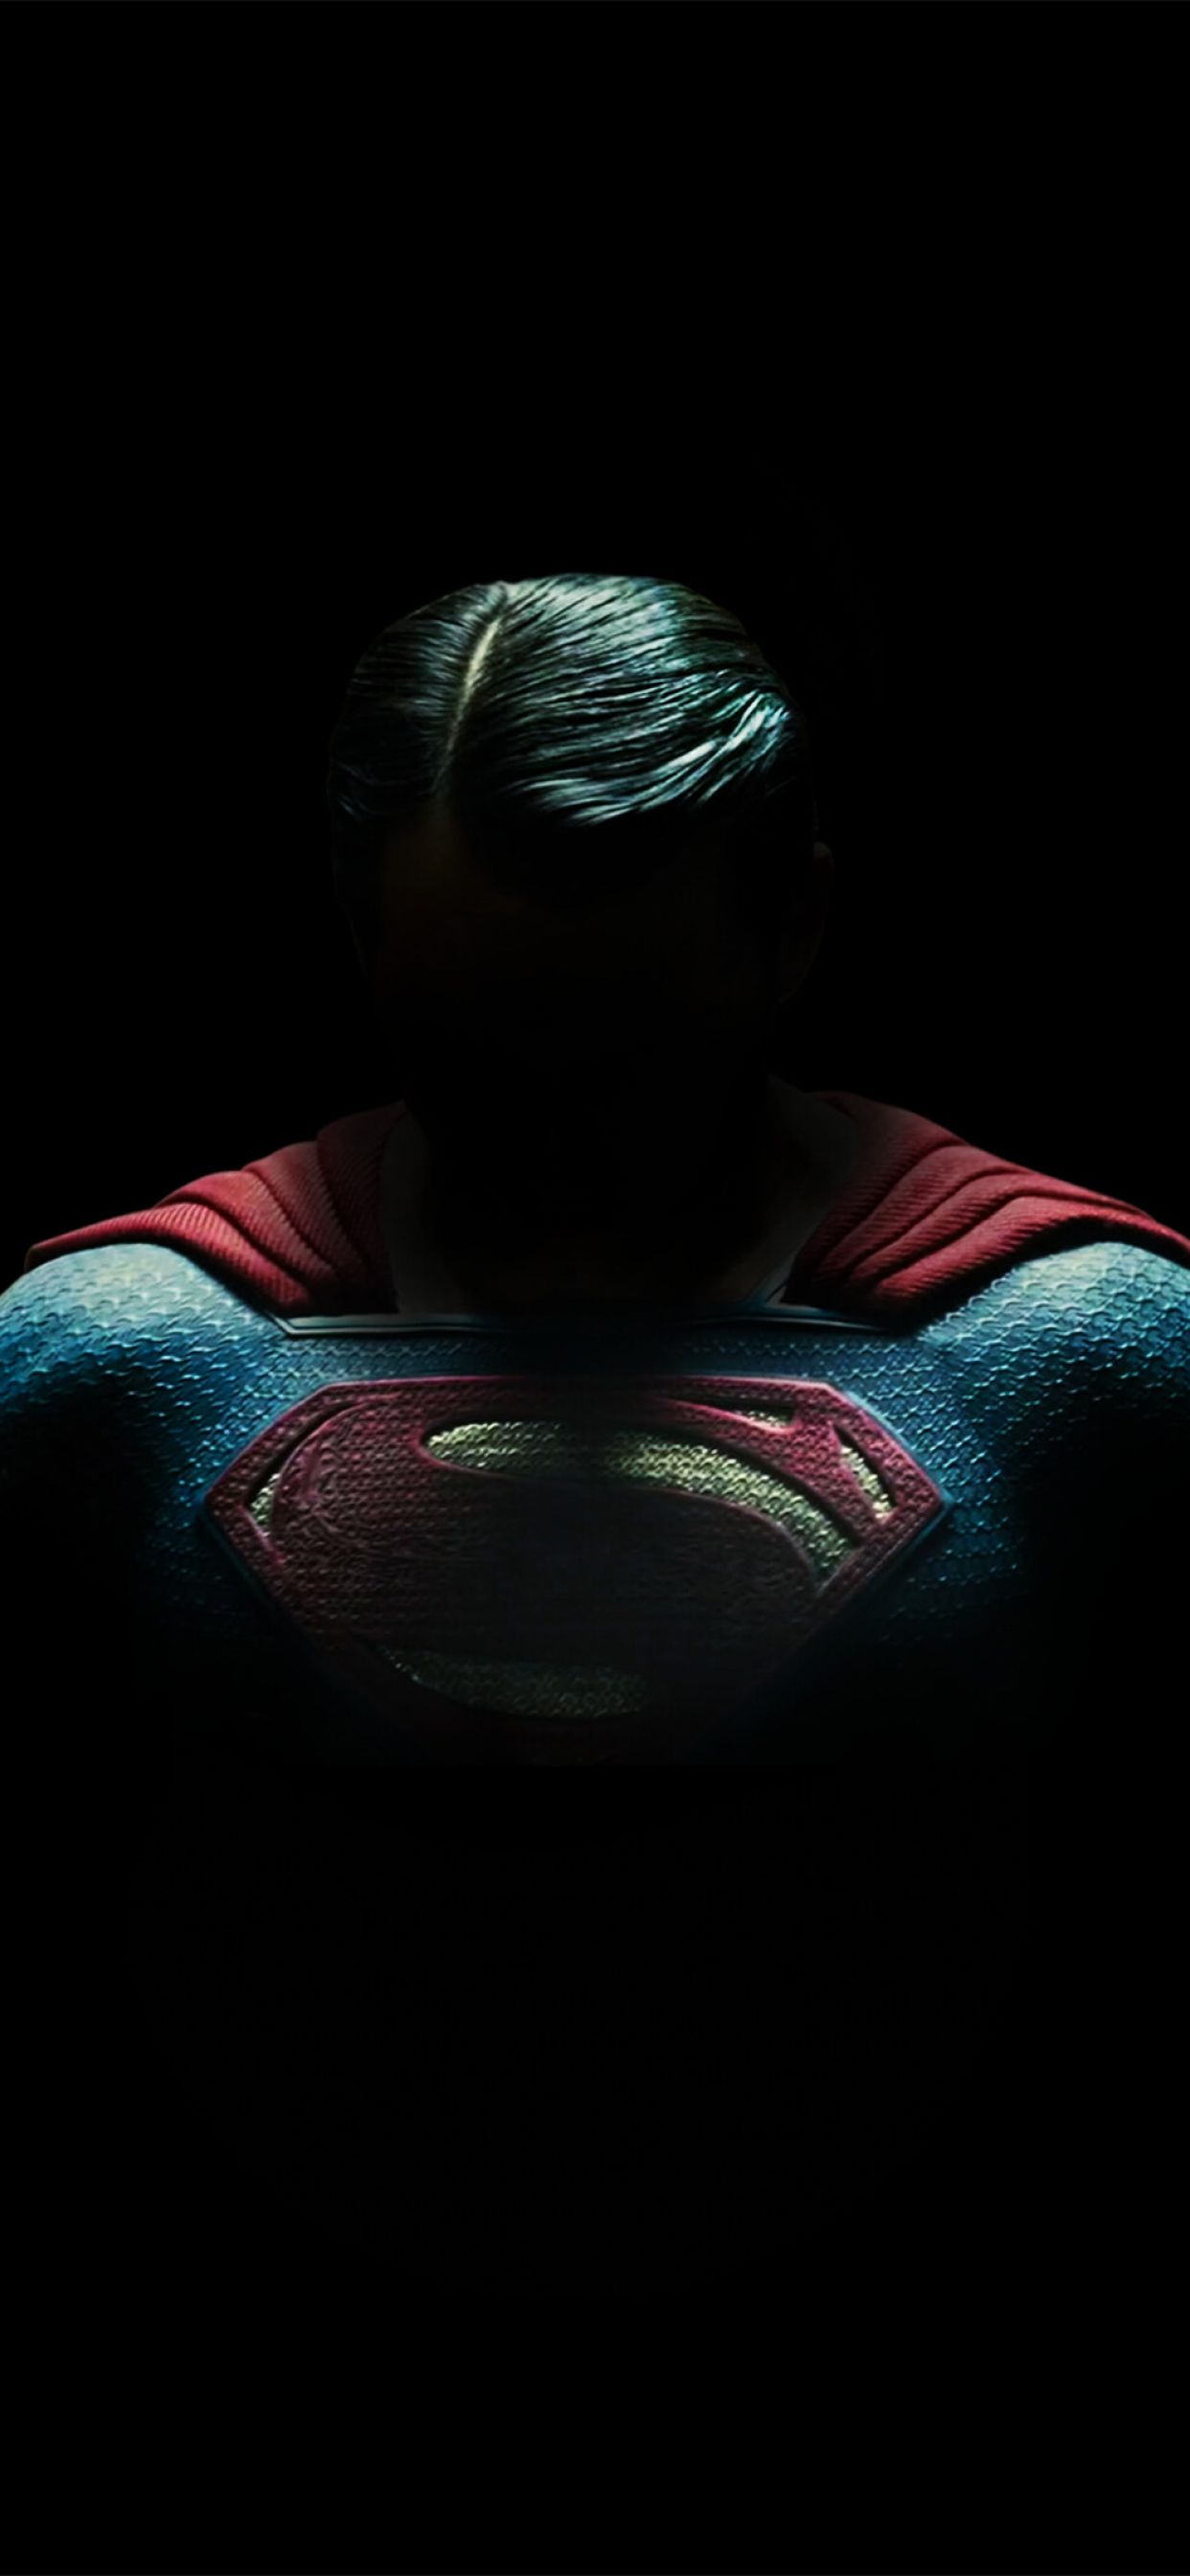 Superman Amoled iPhone XS MAX Wallpaper, HD Superheroes 4K Wallpaper, Image, Photo and Background